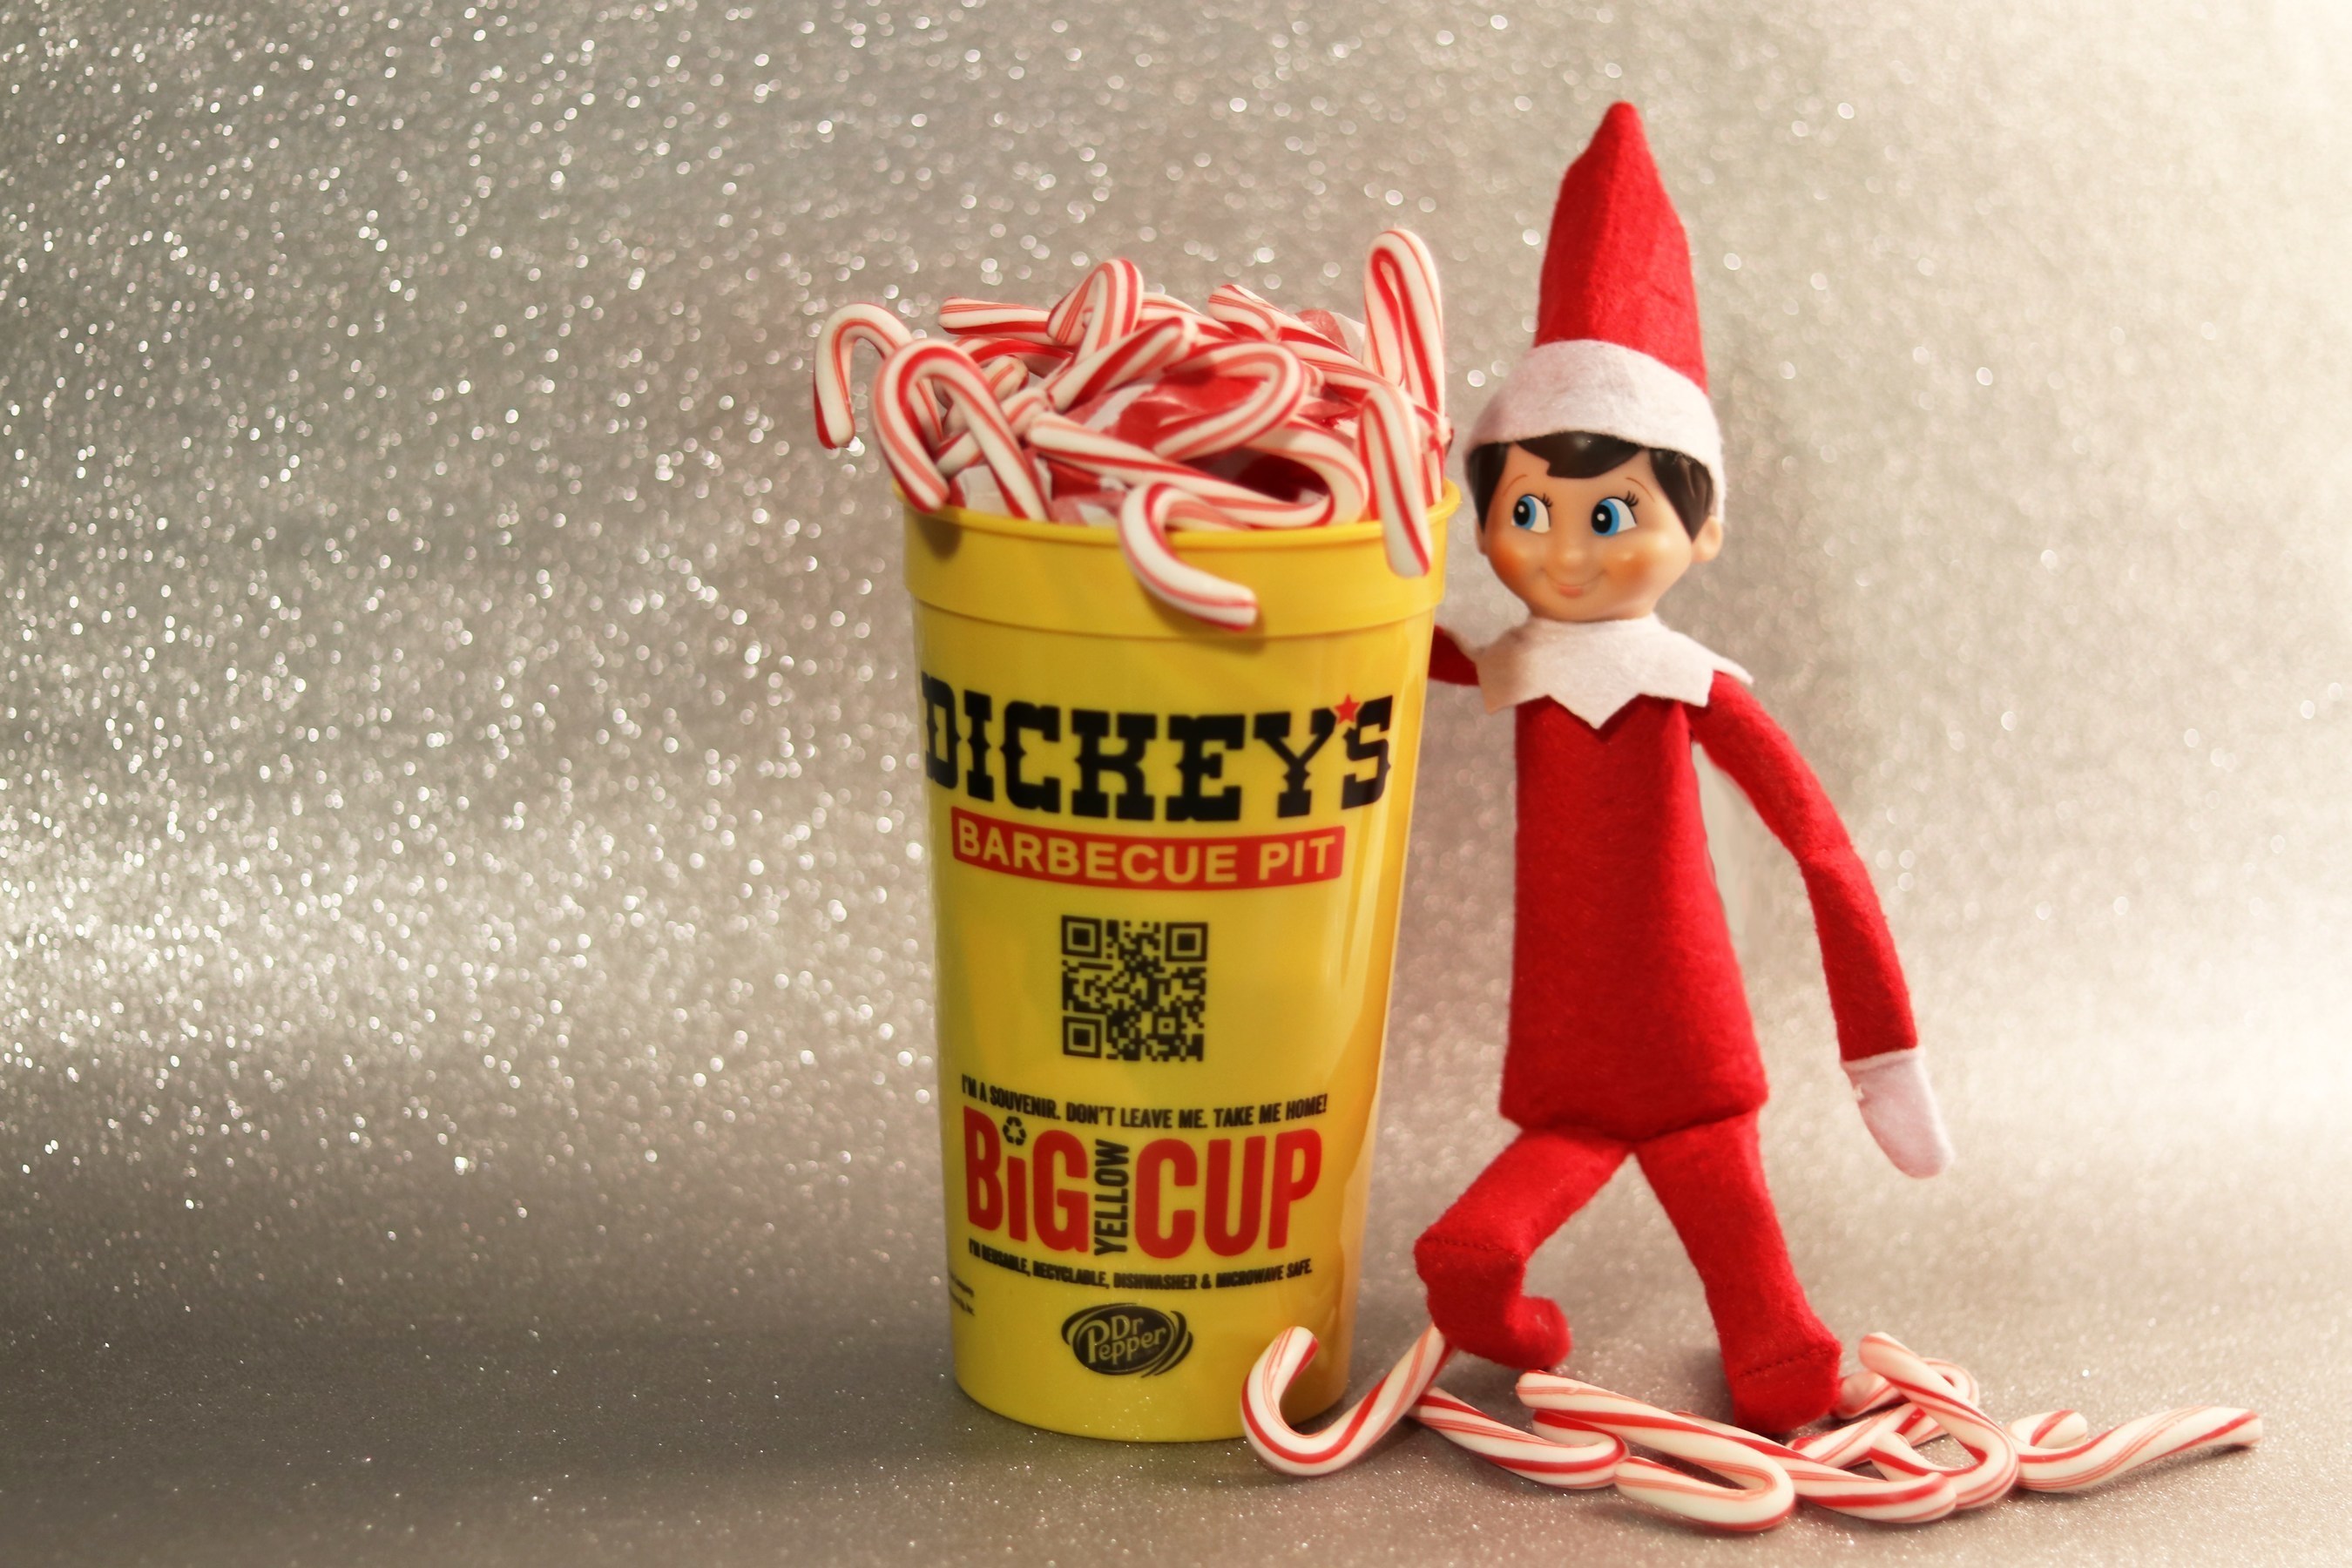 Enter to win delicious prizes with Dickey's Big Yellow Cup Holiday Contest!